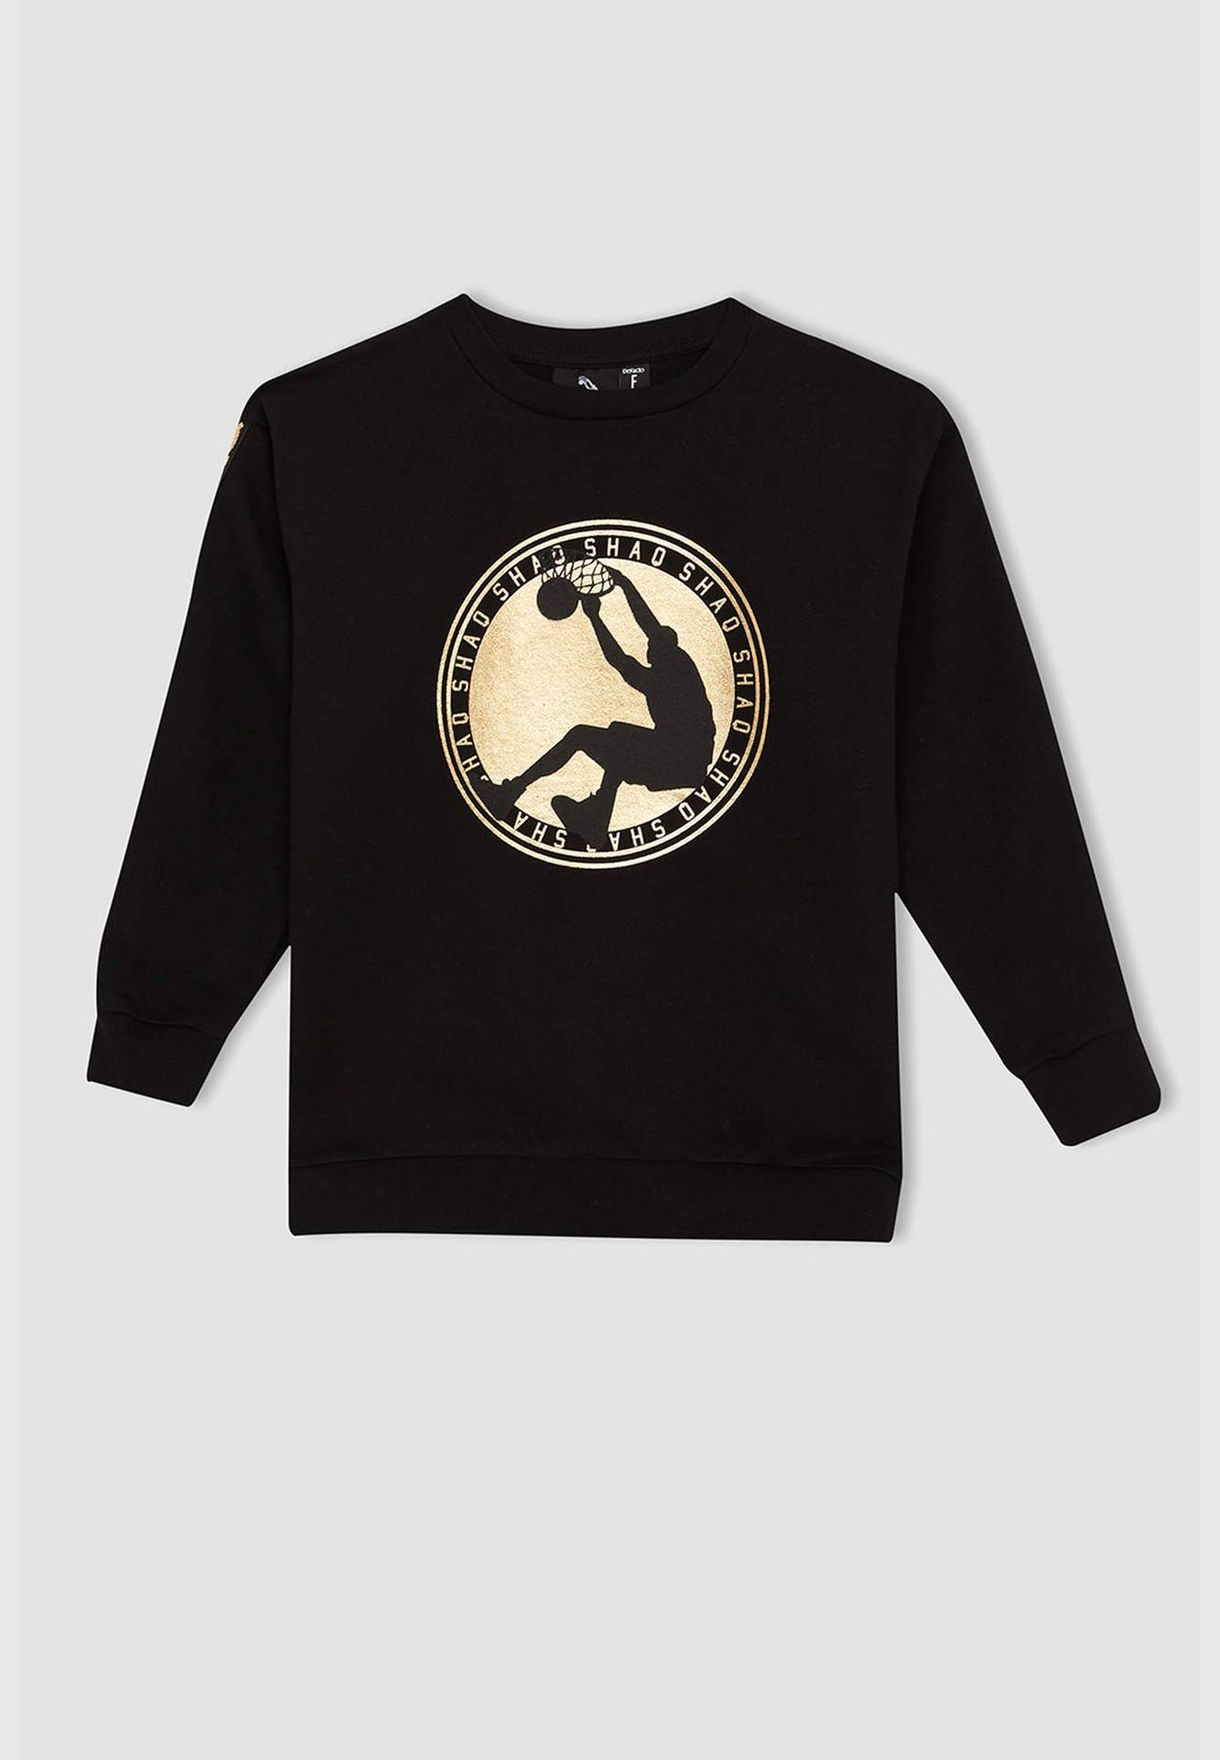 Shaquille O'Neal Licenced Relax Fit Long Sleeve Printed Sweatshirt